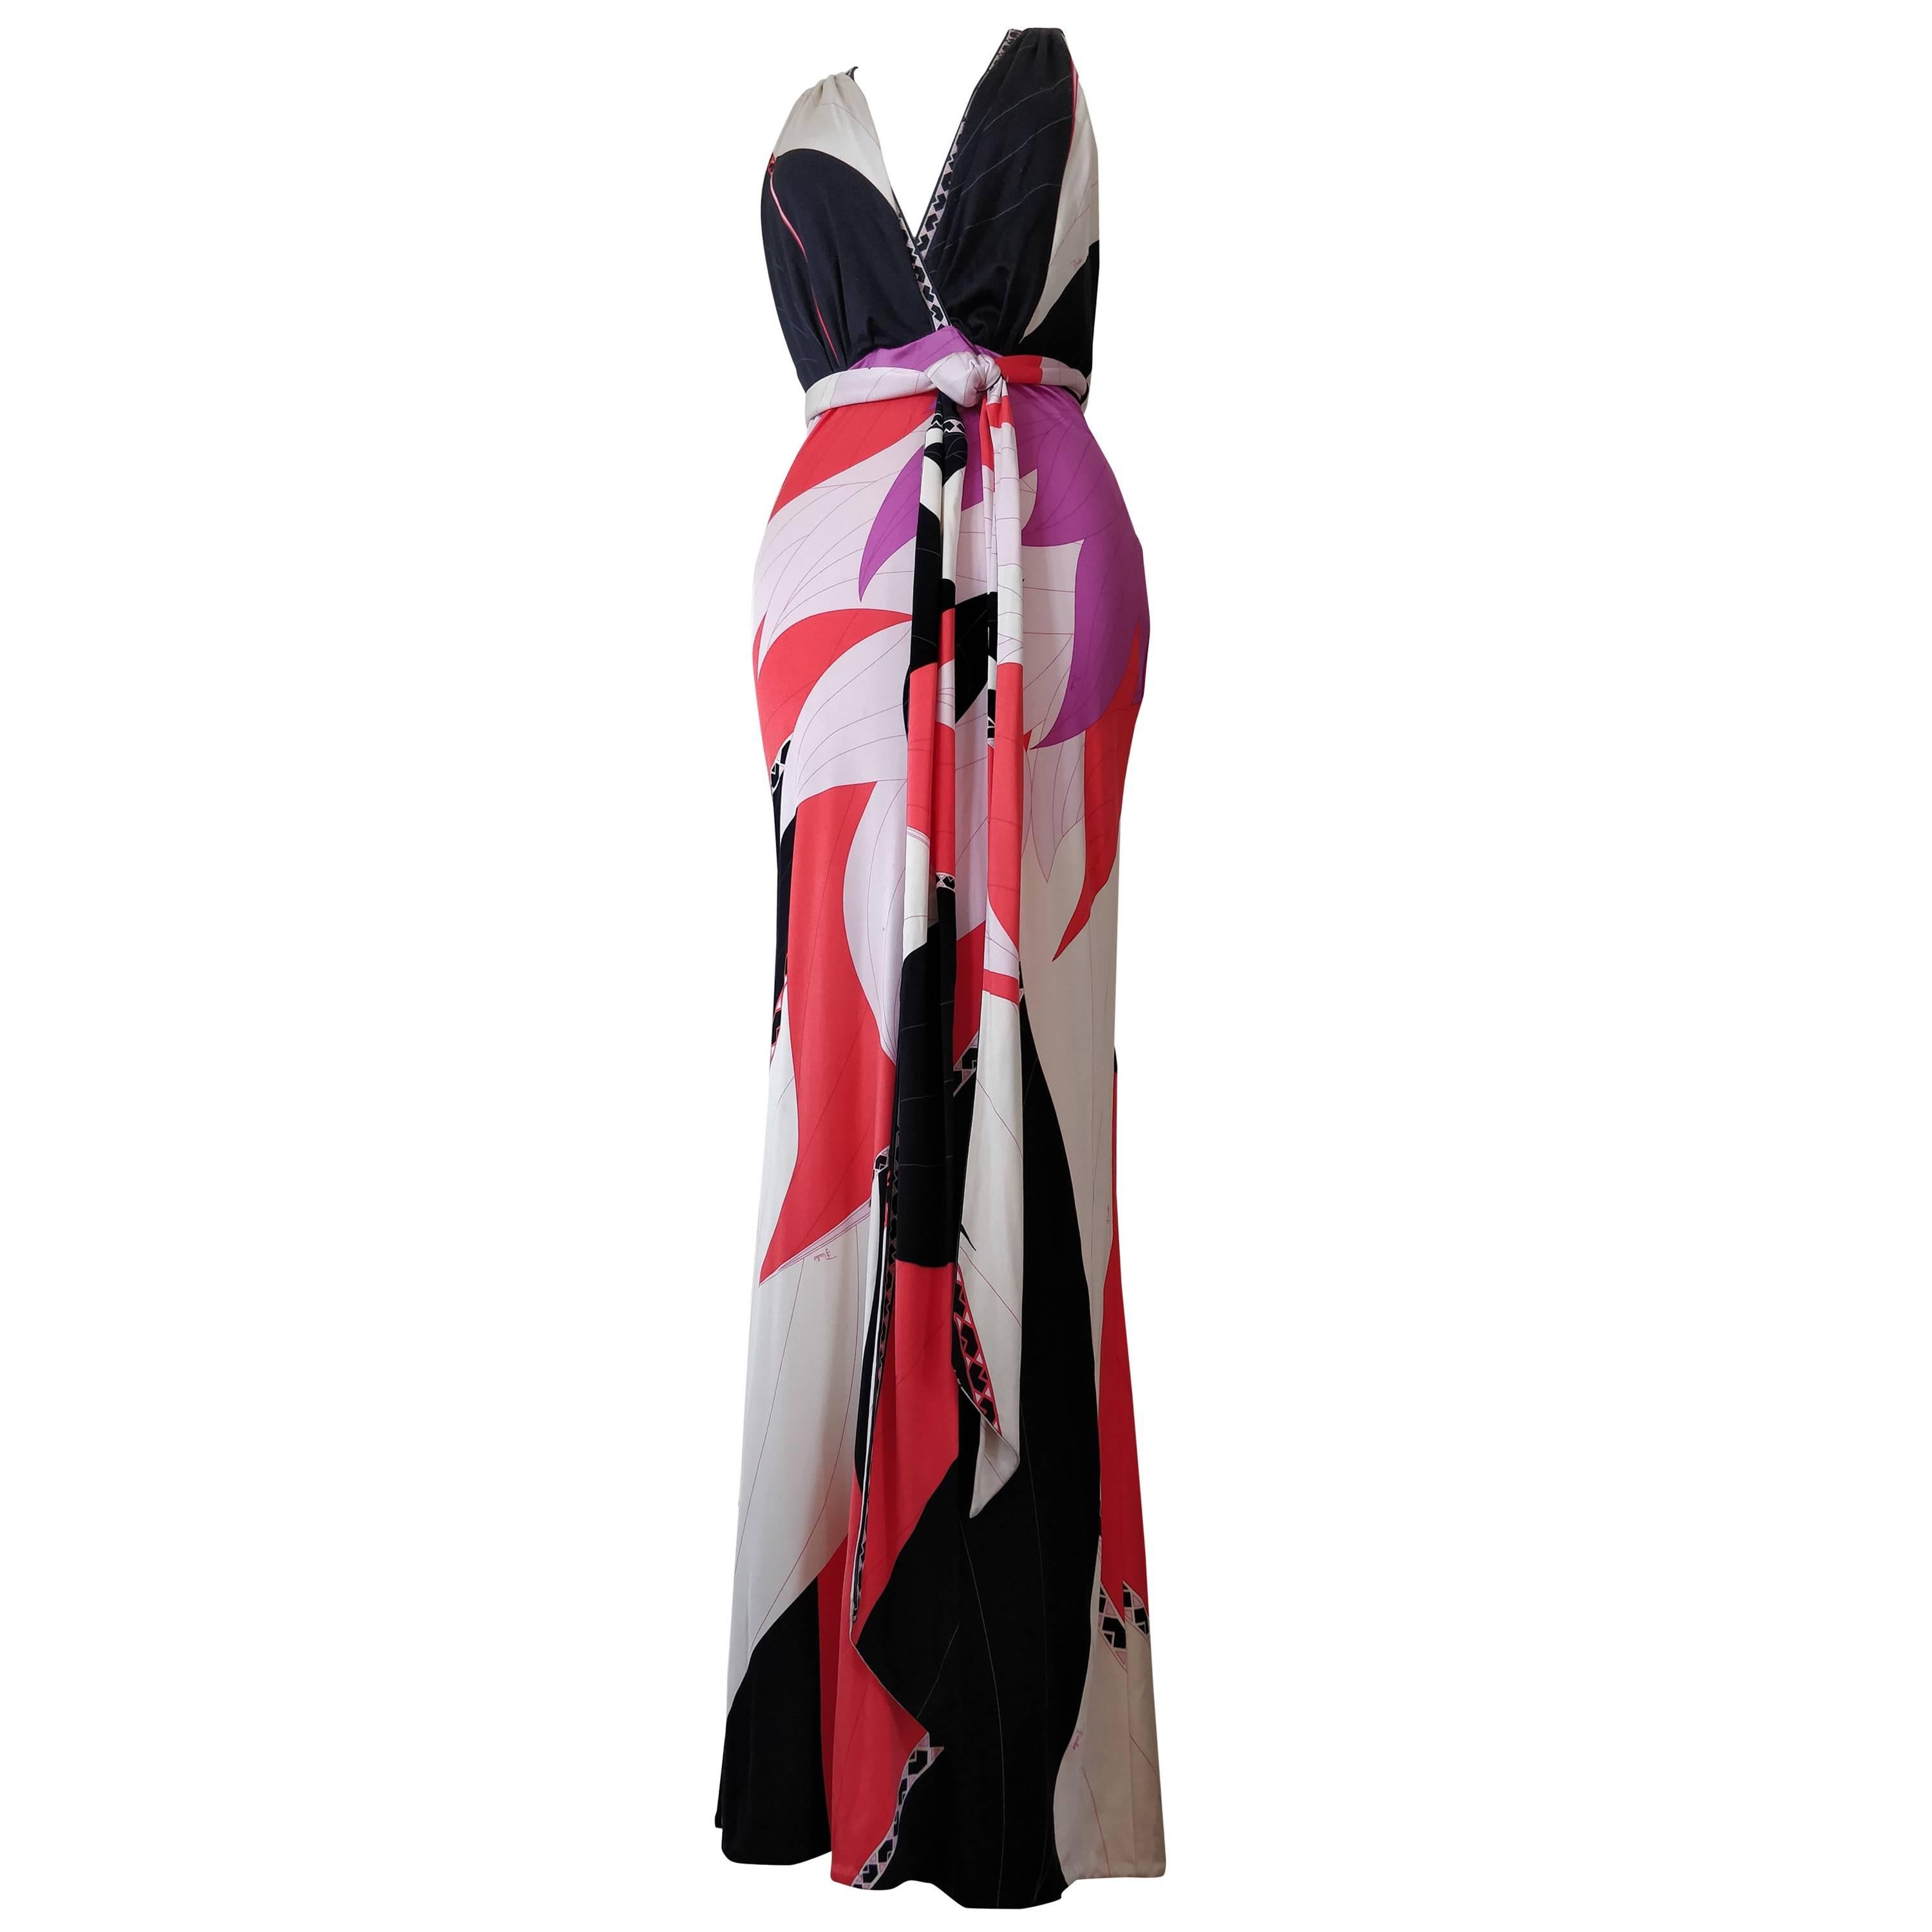 Emilio Pucci Silk Jersey Maxi Dress with Halter Neckline and Low-Cut Back